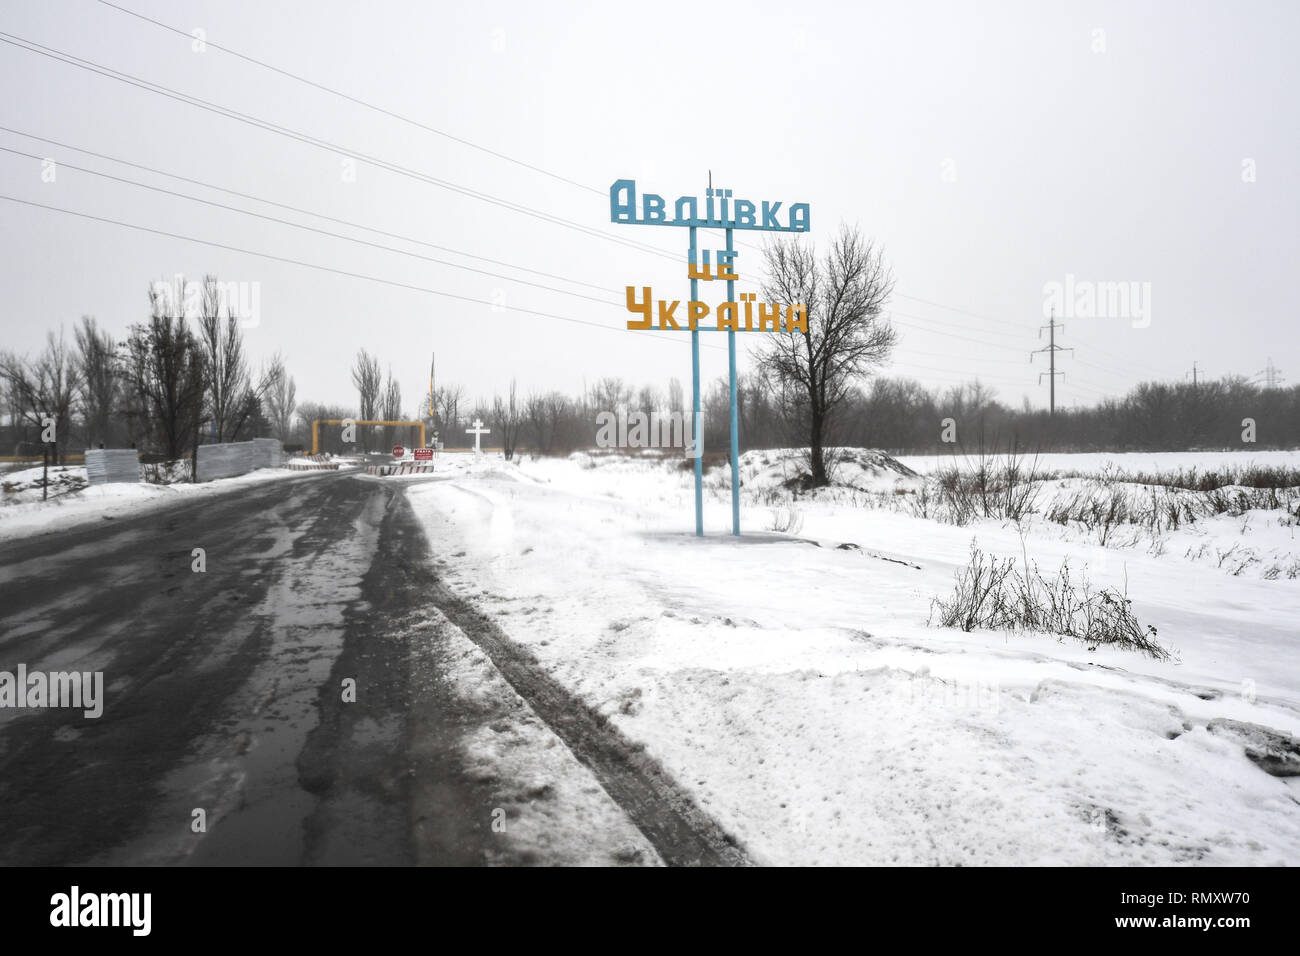 The sign for Advika is seen in Ukrainian colors. The town has exchanged hands many times and experienced some of the worst fighting over the years. The conflict in the Eastern Ukraine has become more political than physical since 2014 when 12,000 lost their lives. Today though, it is spasmodic and most shelling is during the nighttime. (The official observers from OSCE organization do not monitor at night!). Due to the Minsk ceasefire both parties try to respect it and only light equipment is seen in use. Stock Photo